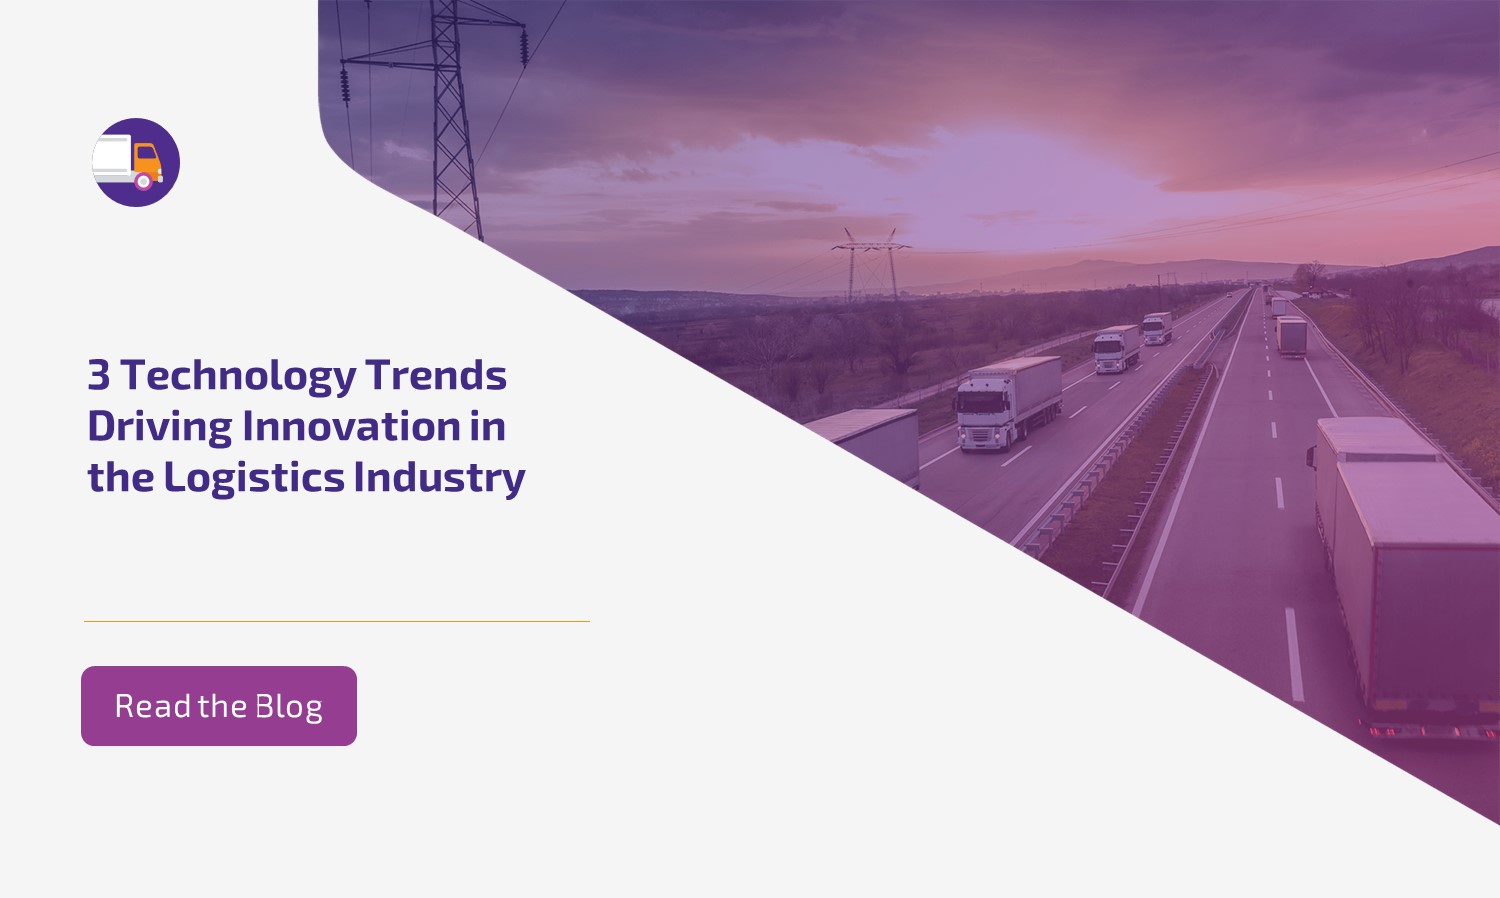 3 technology trends driving innovation in the logistics industry